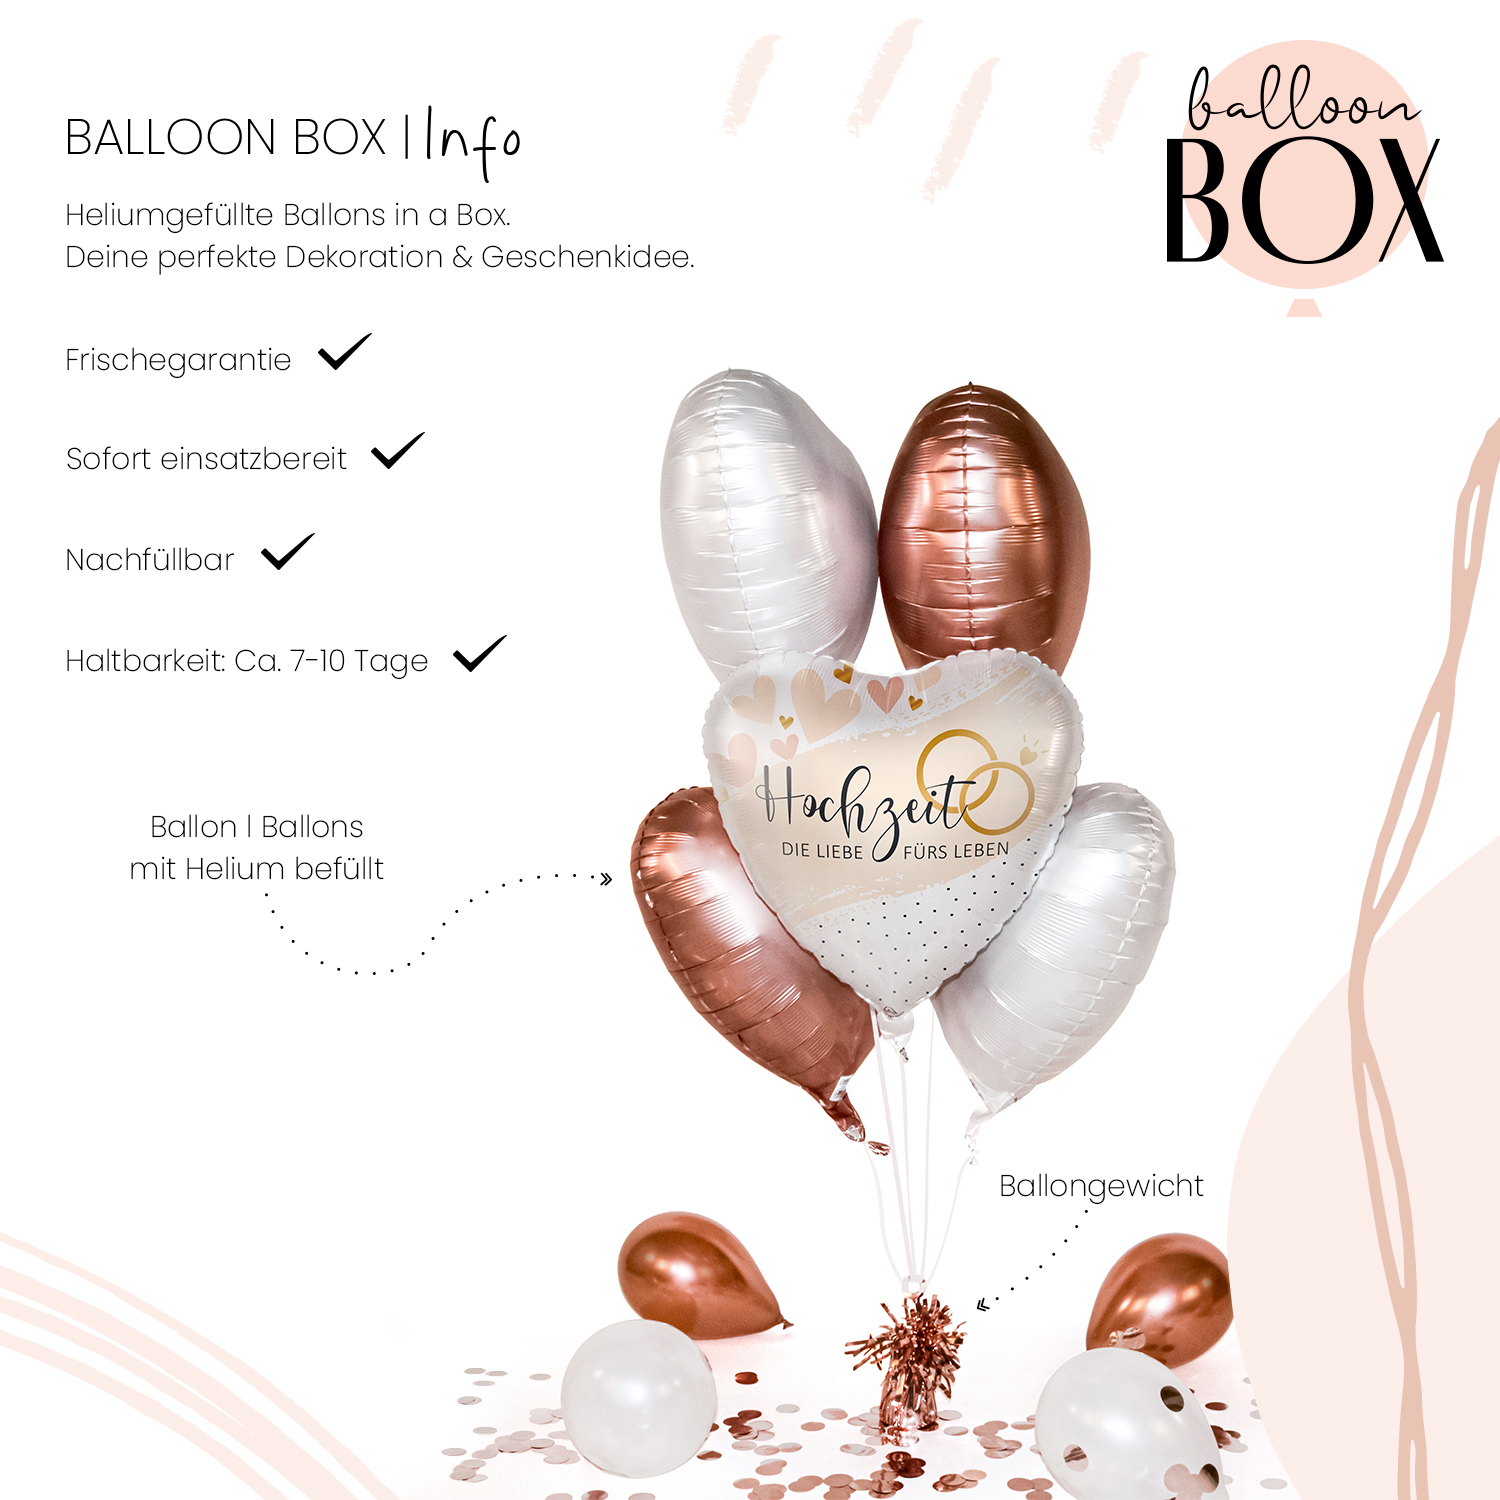 Heliumballon in a Box - Love of Life